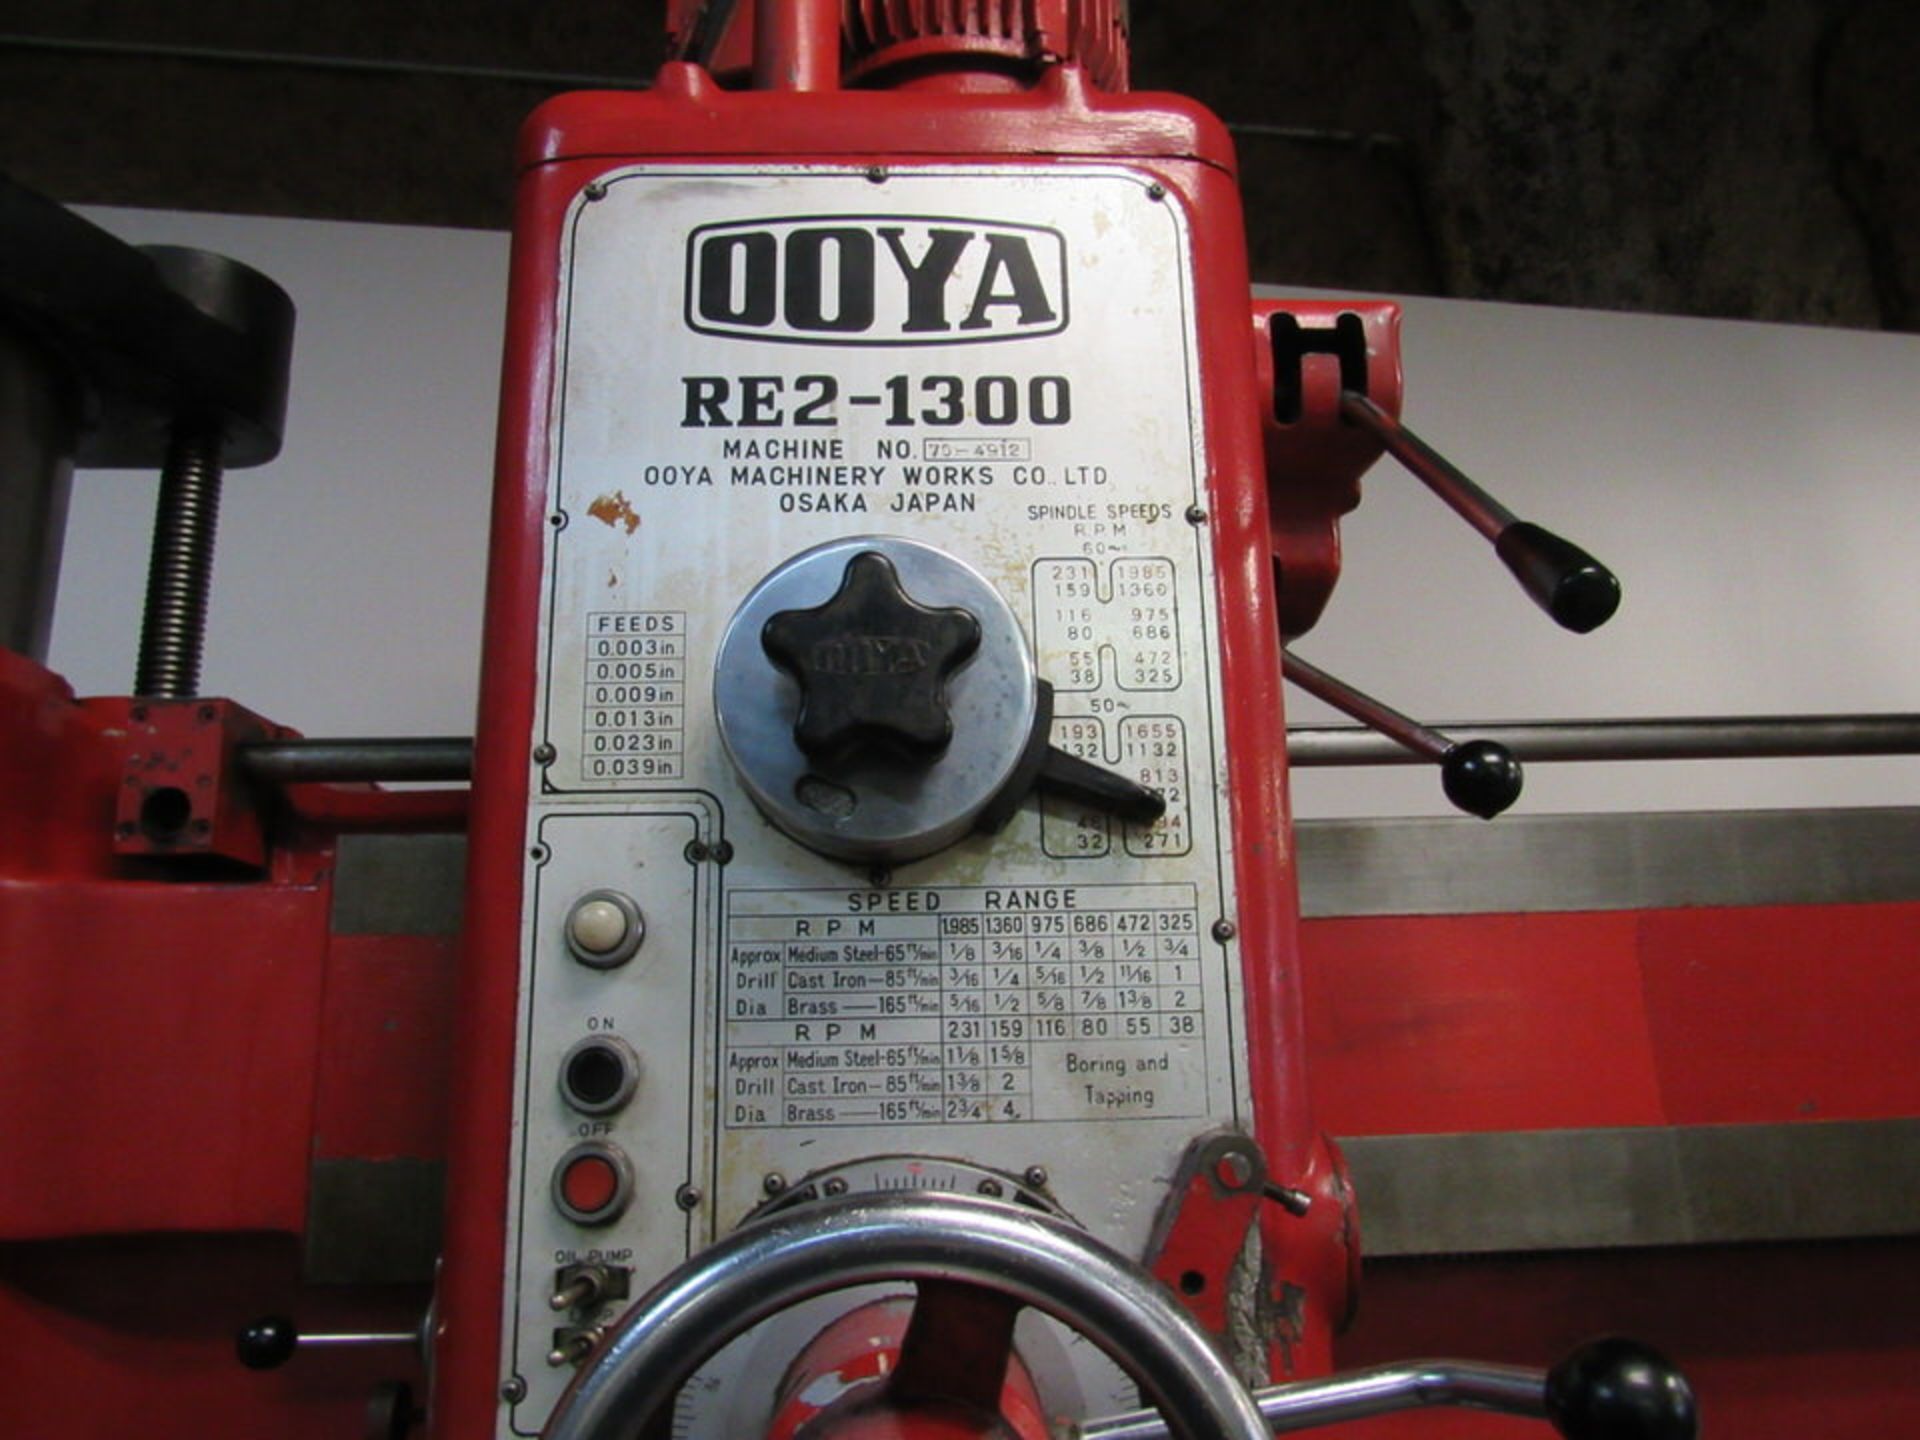 OOYA Radial Drill REZ-1300 - Image 2 of 3